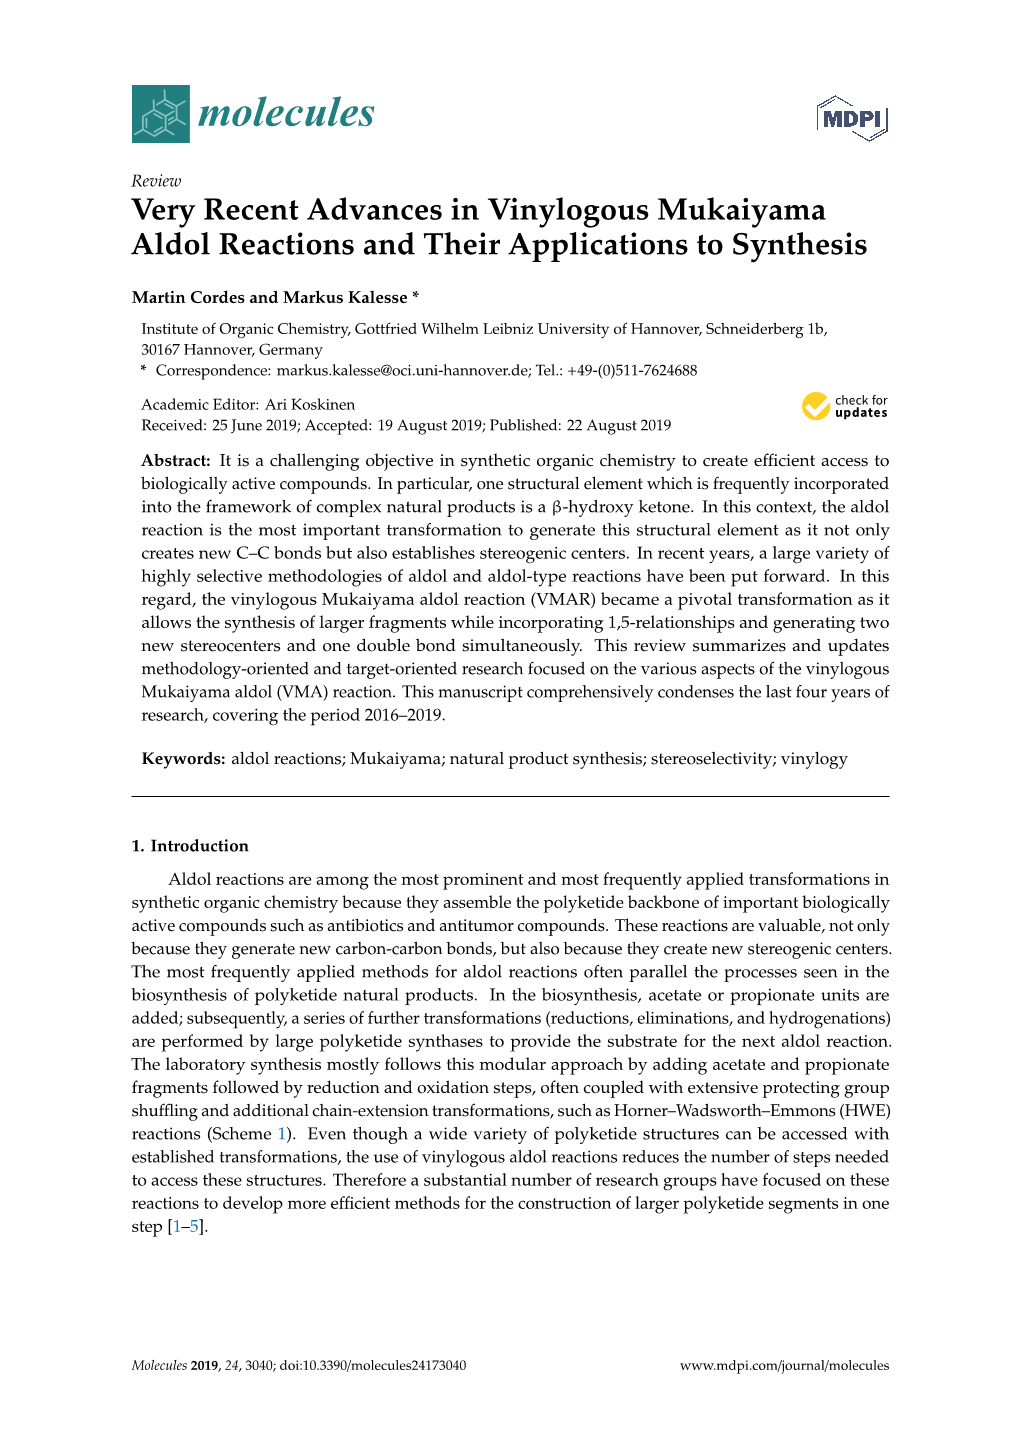 Very Recent Advances in Vinylogous Mukaiyama Aldol Reactions and Their Applications to Synthesis